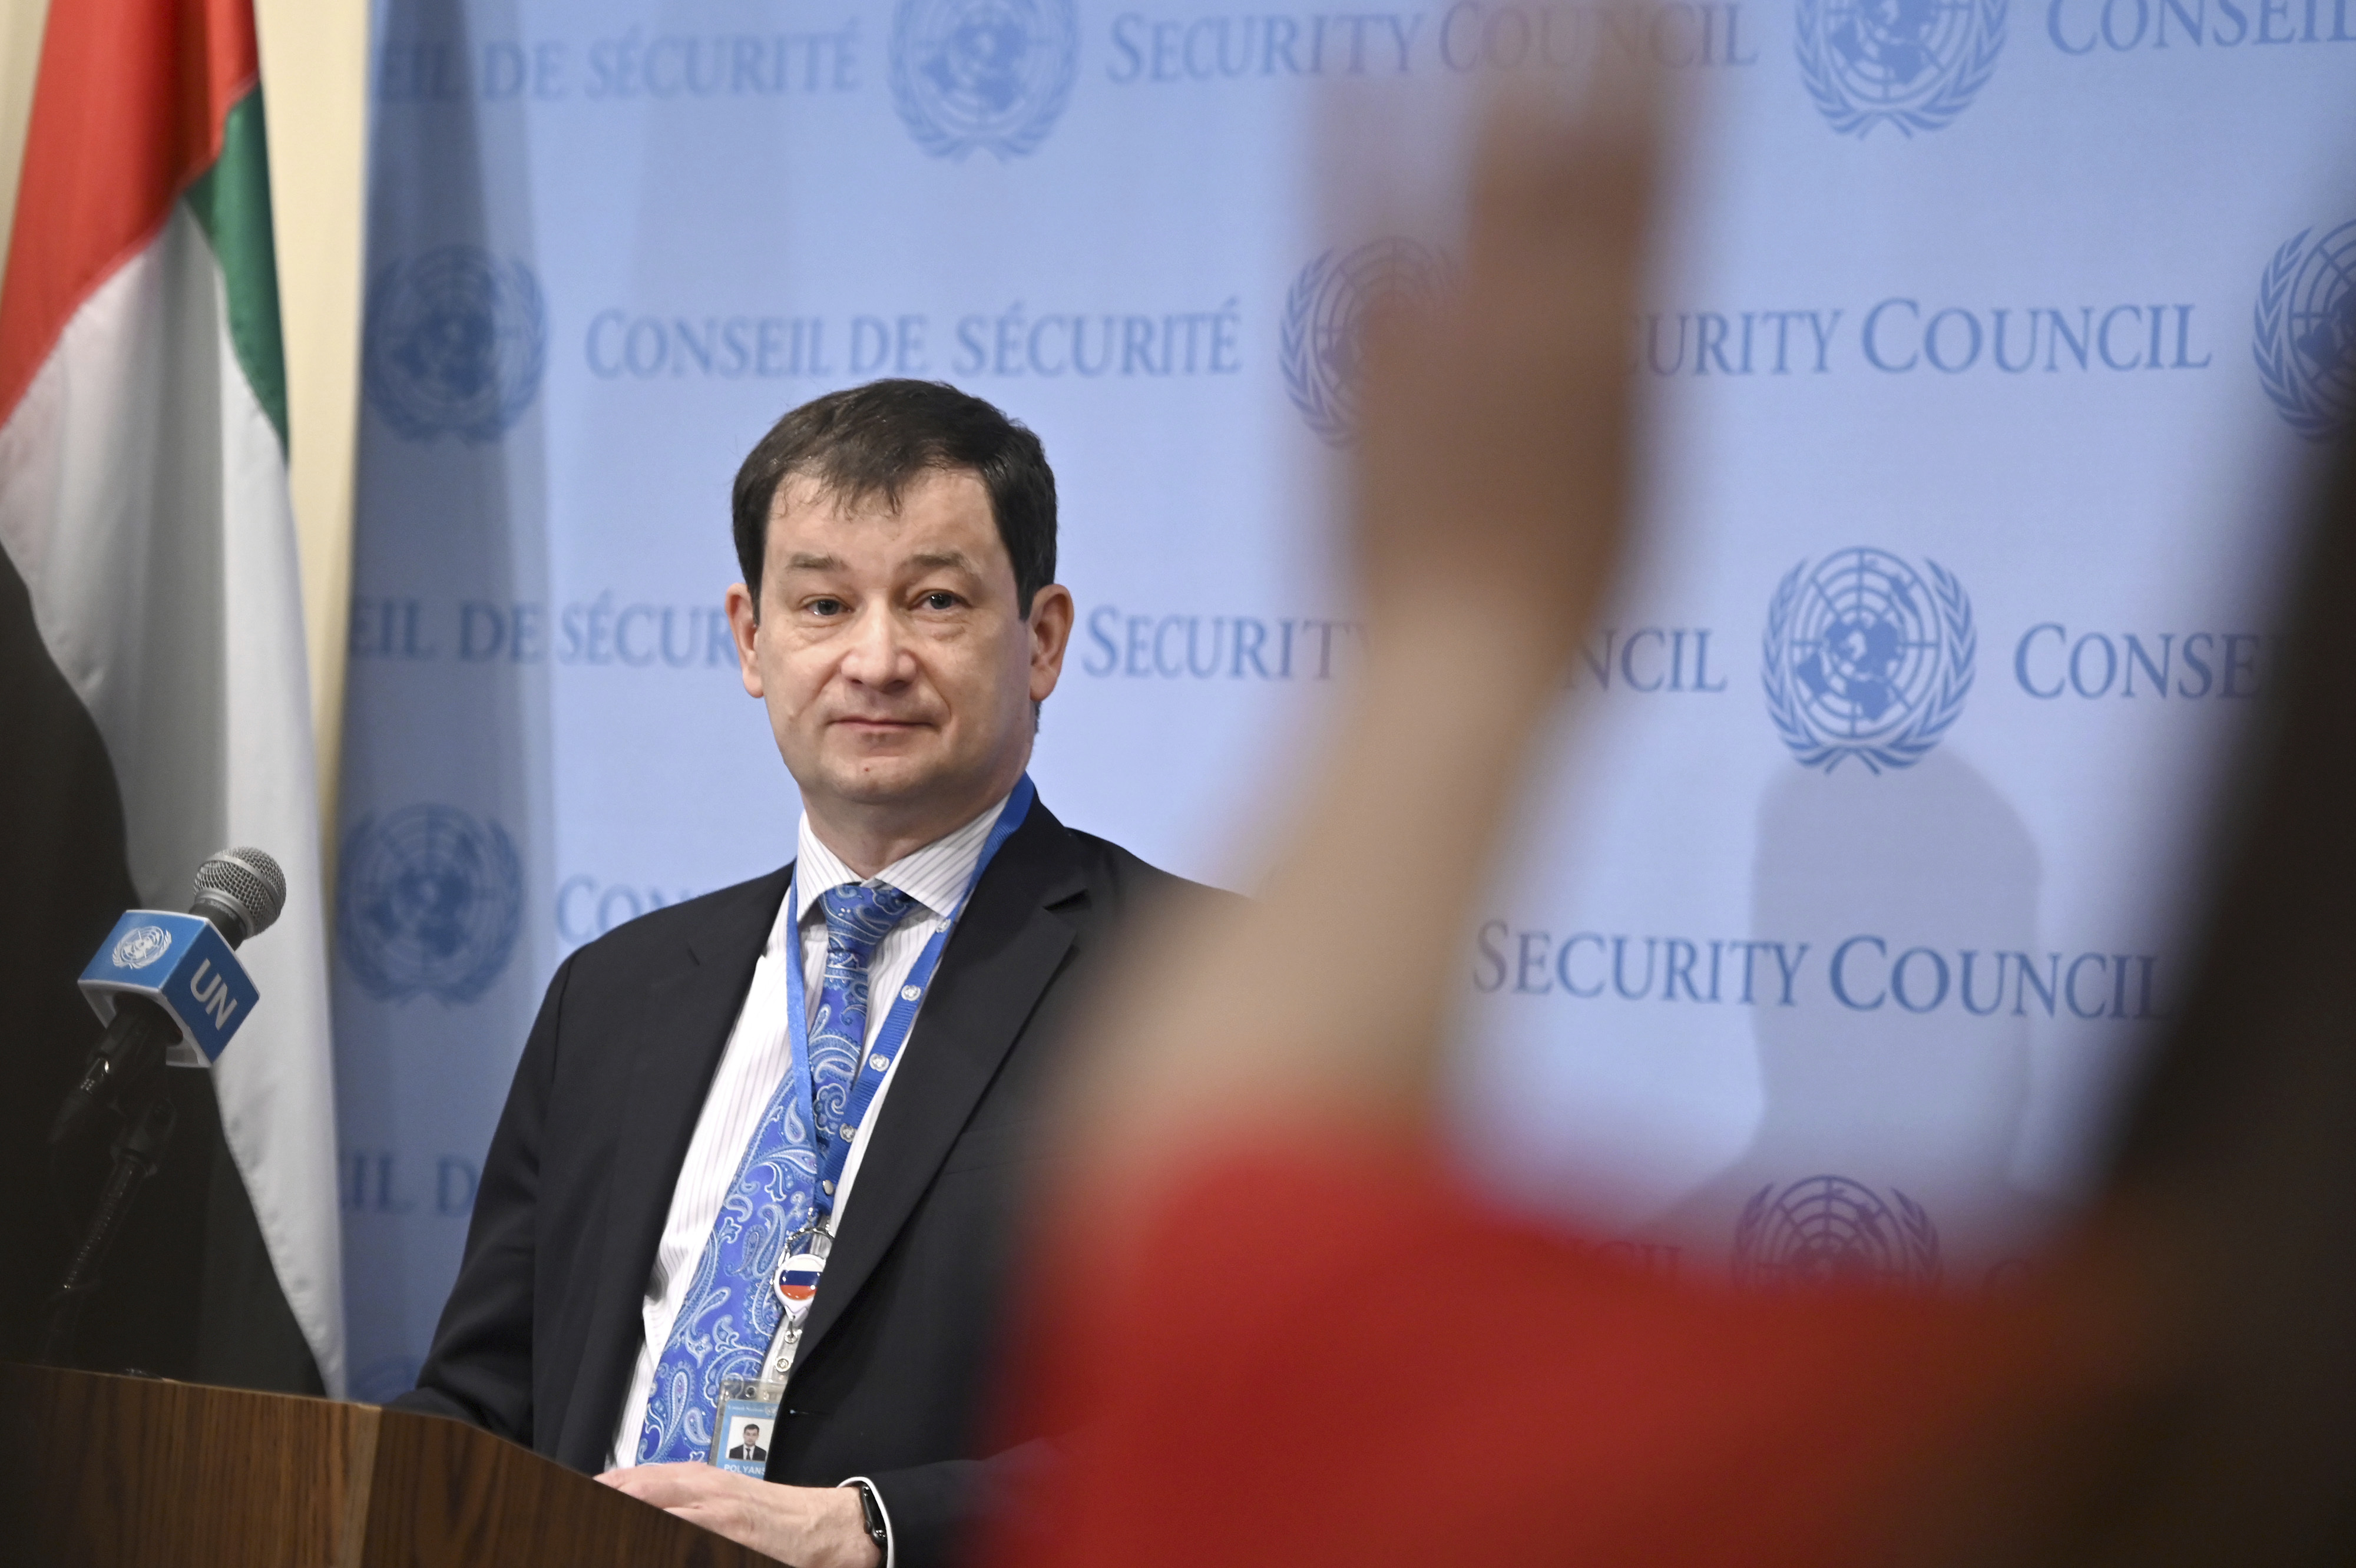 Dmitry Polyanskiy, First Deputy Permanent Representative of Russia's mission to the United Nations, during a news conference at the United Nations Headquarters in New York on April 25, 2022. 